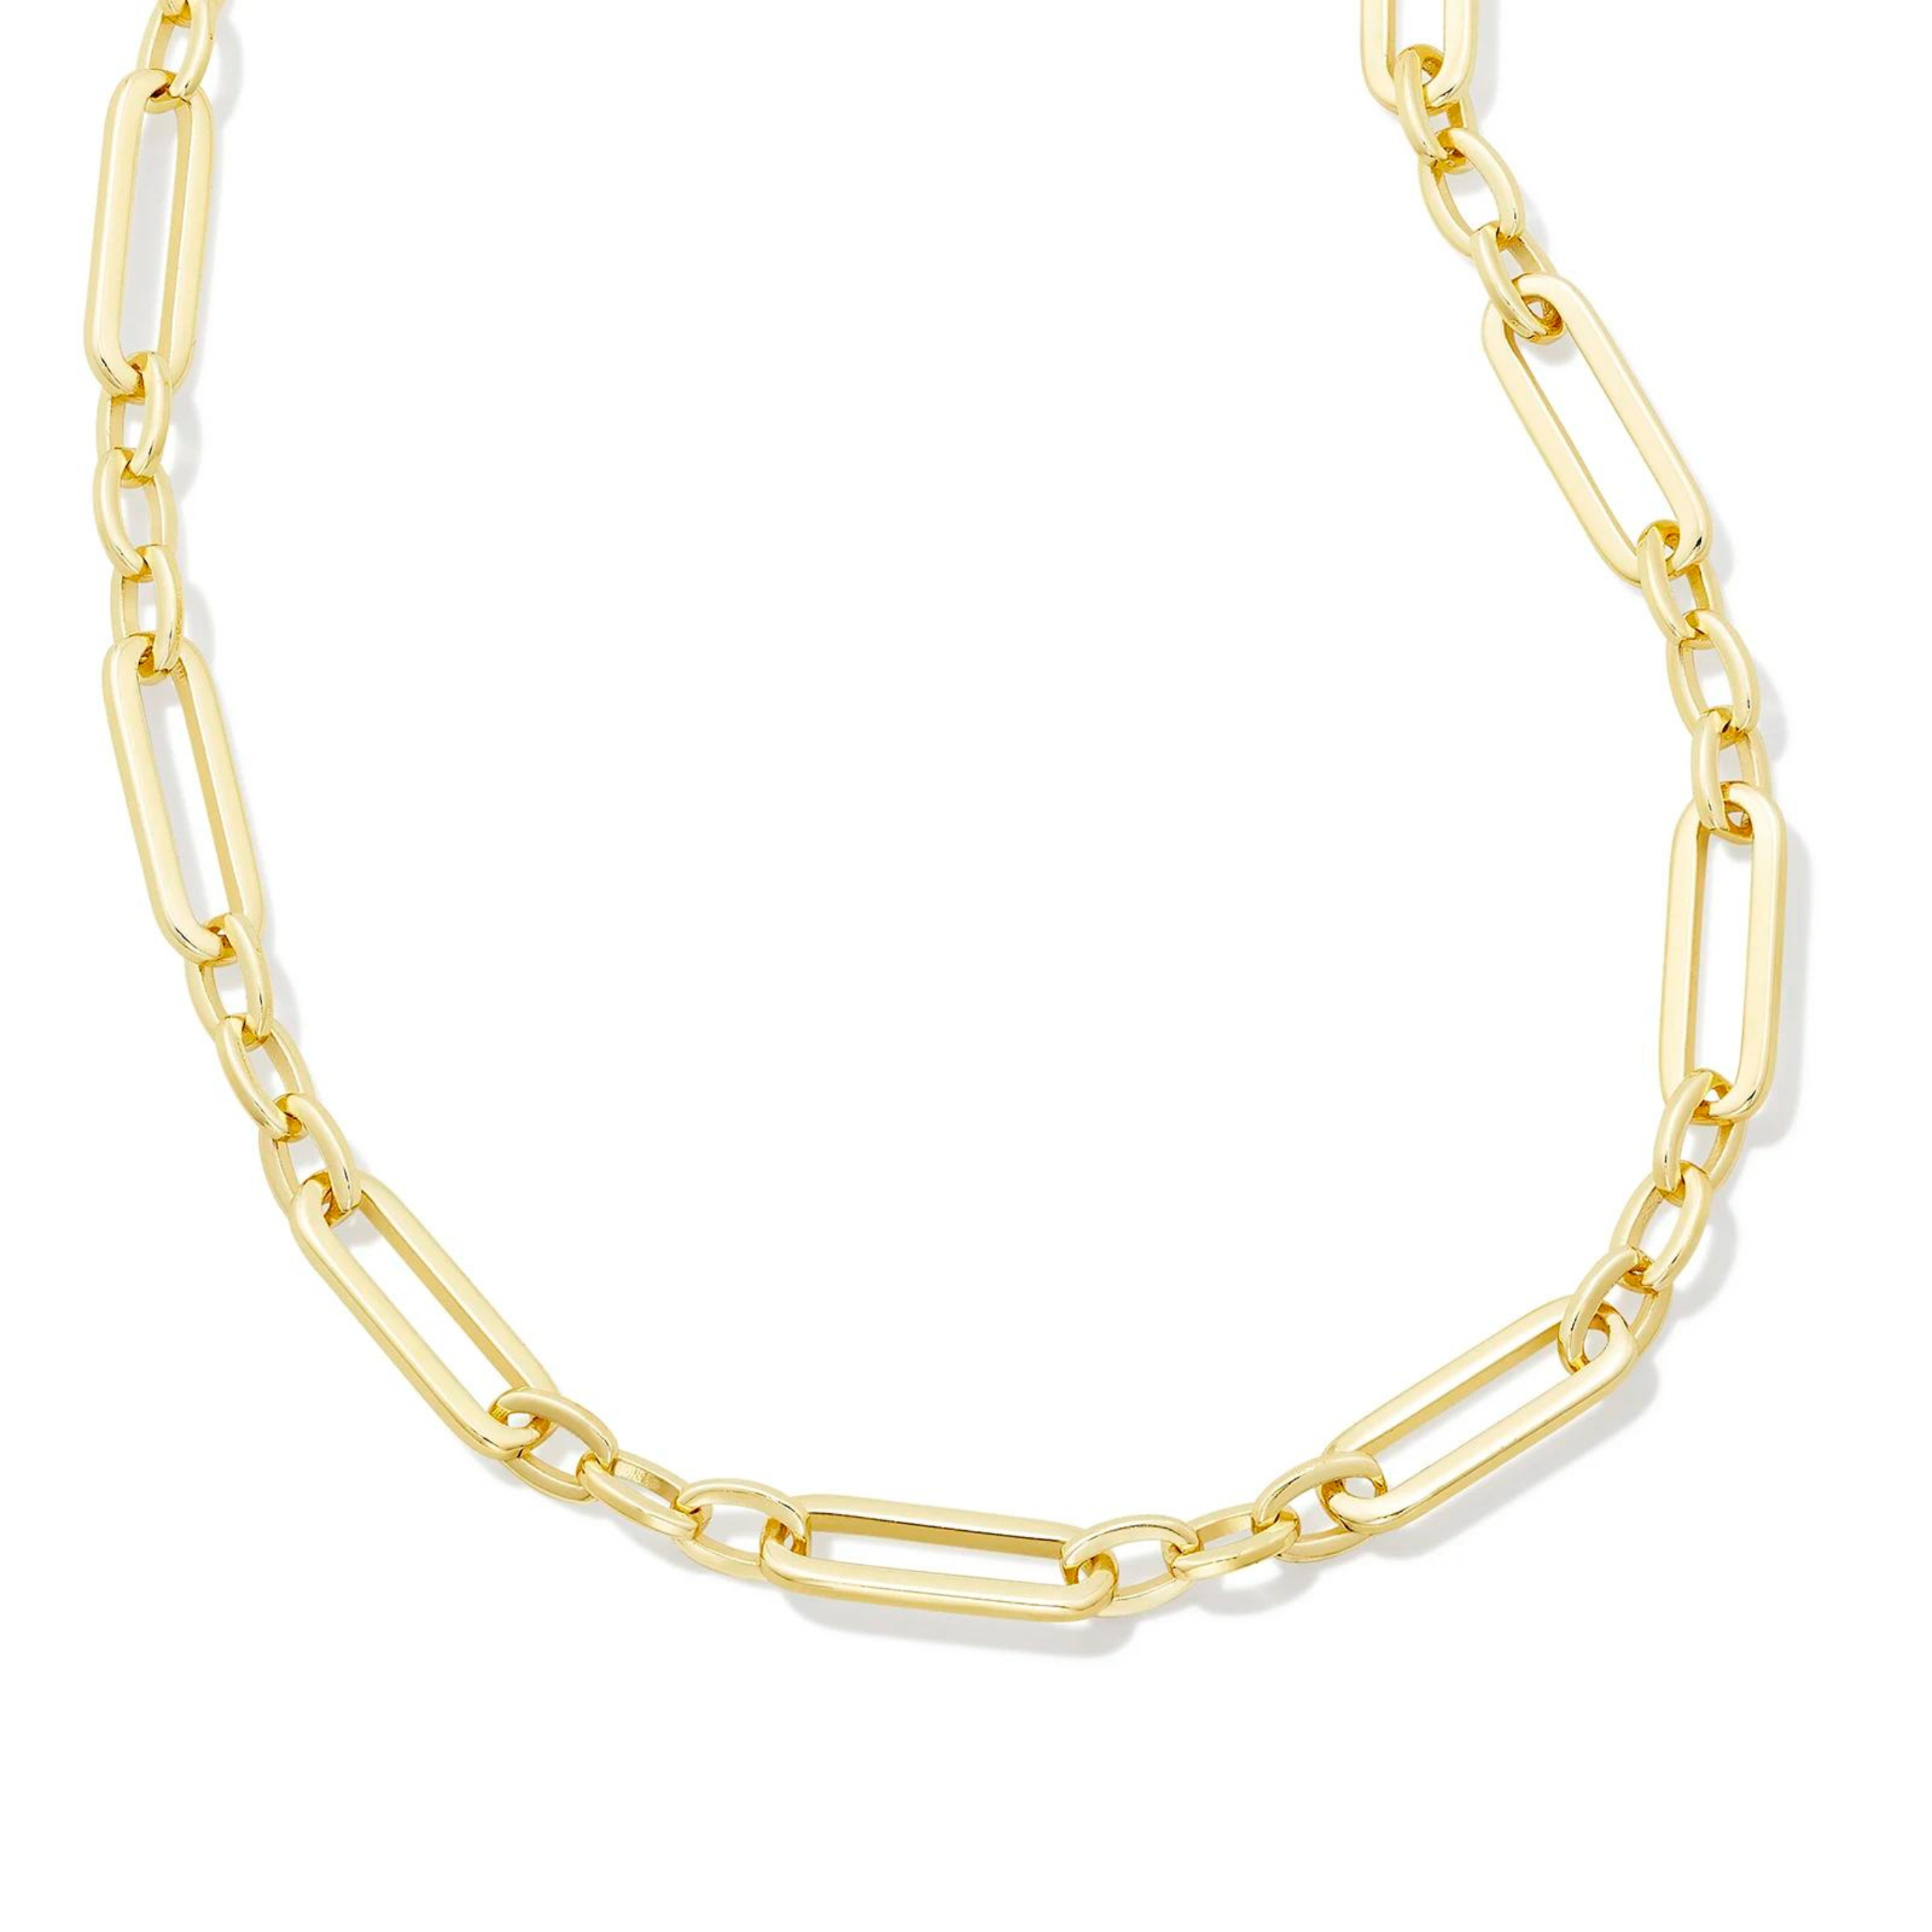 Pictured is a gold chain link necklace on a white background. 